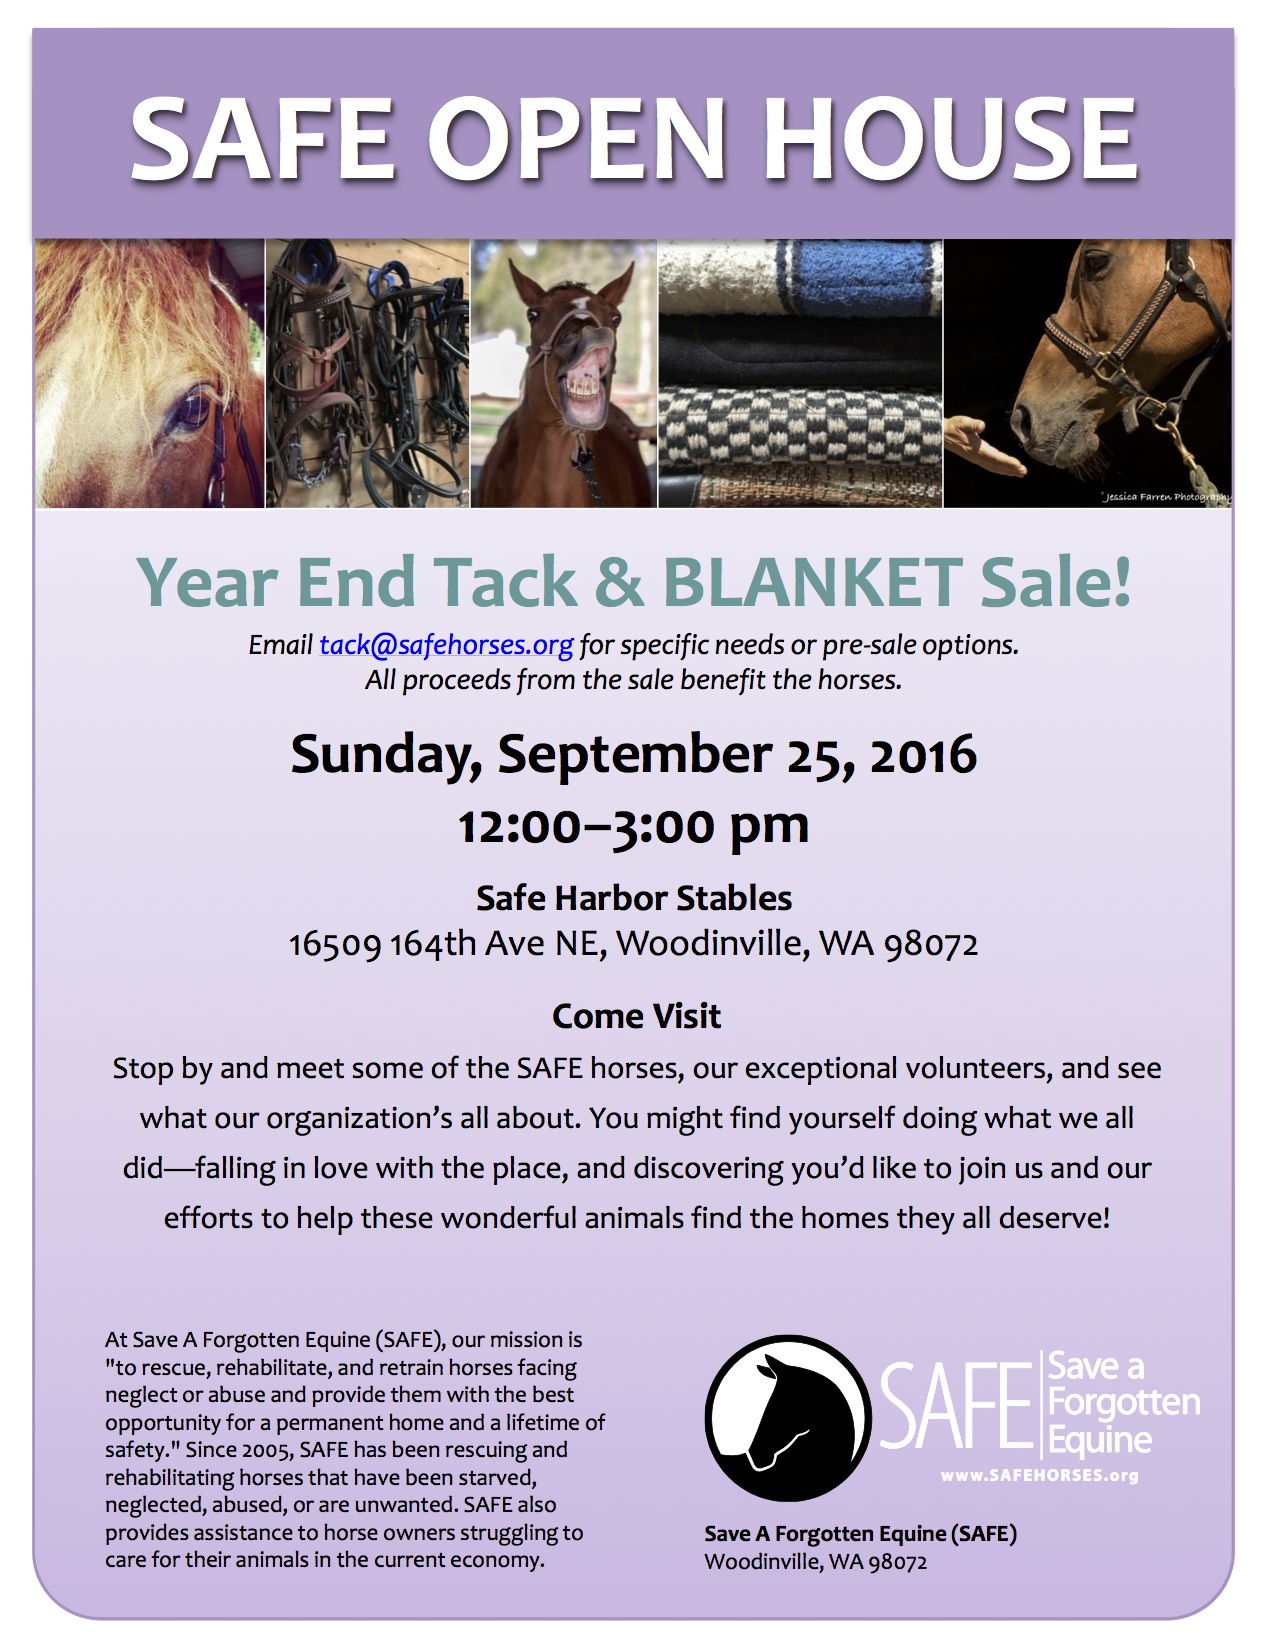 Fall Open House and Year End Tack and Blanket SALE Save a